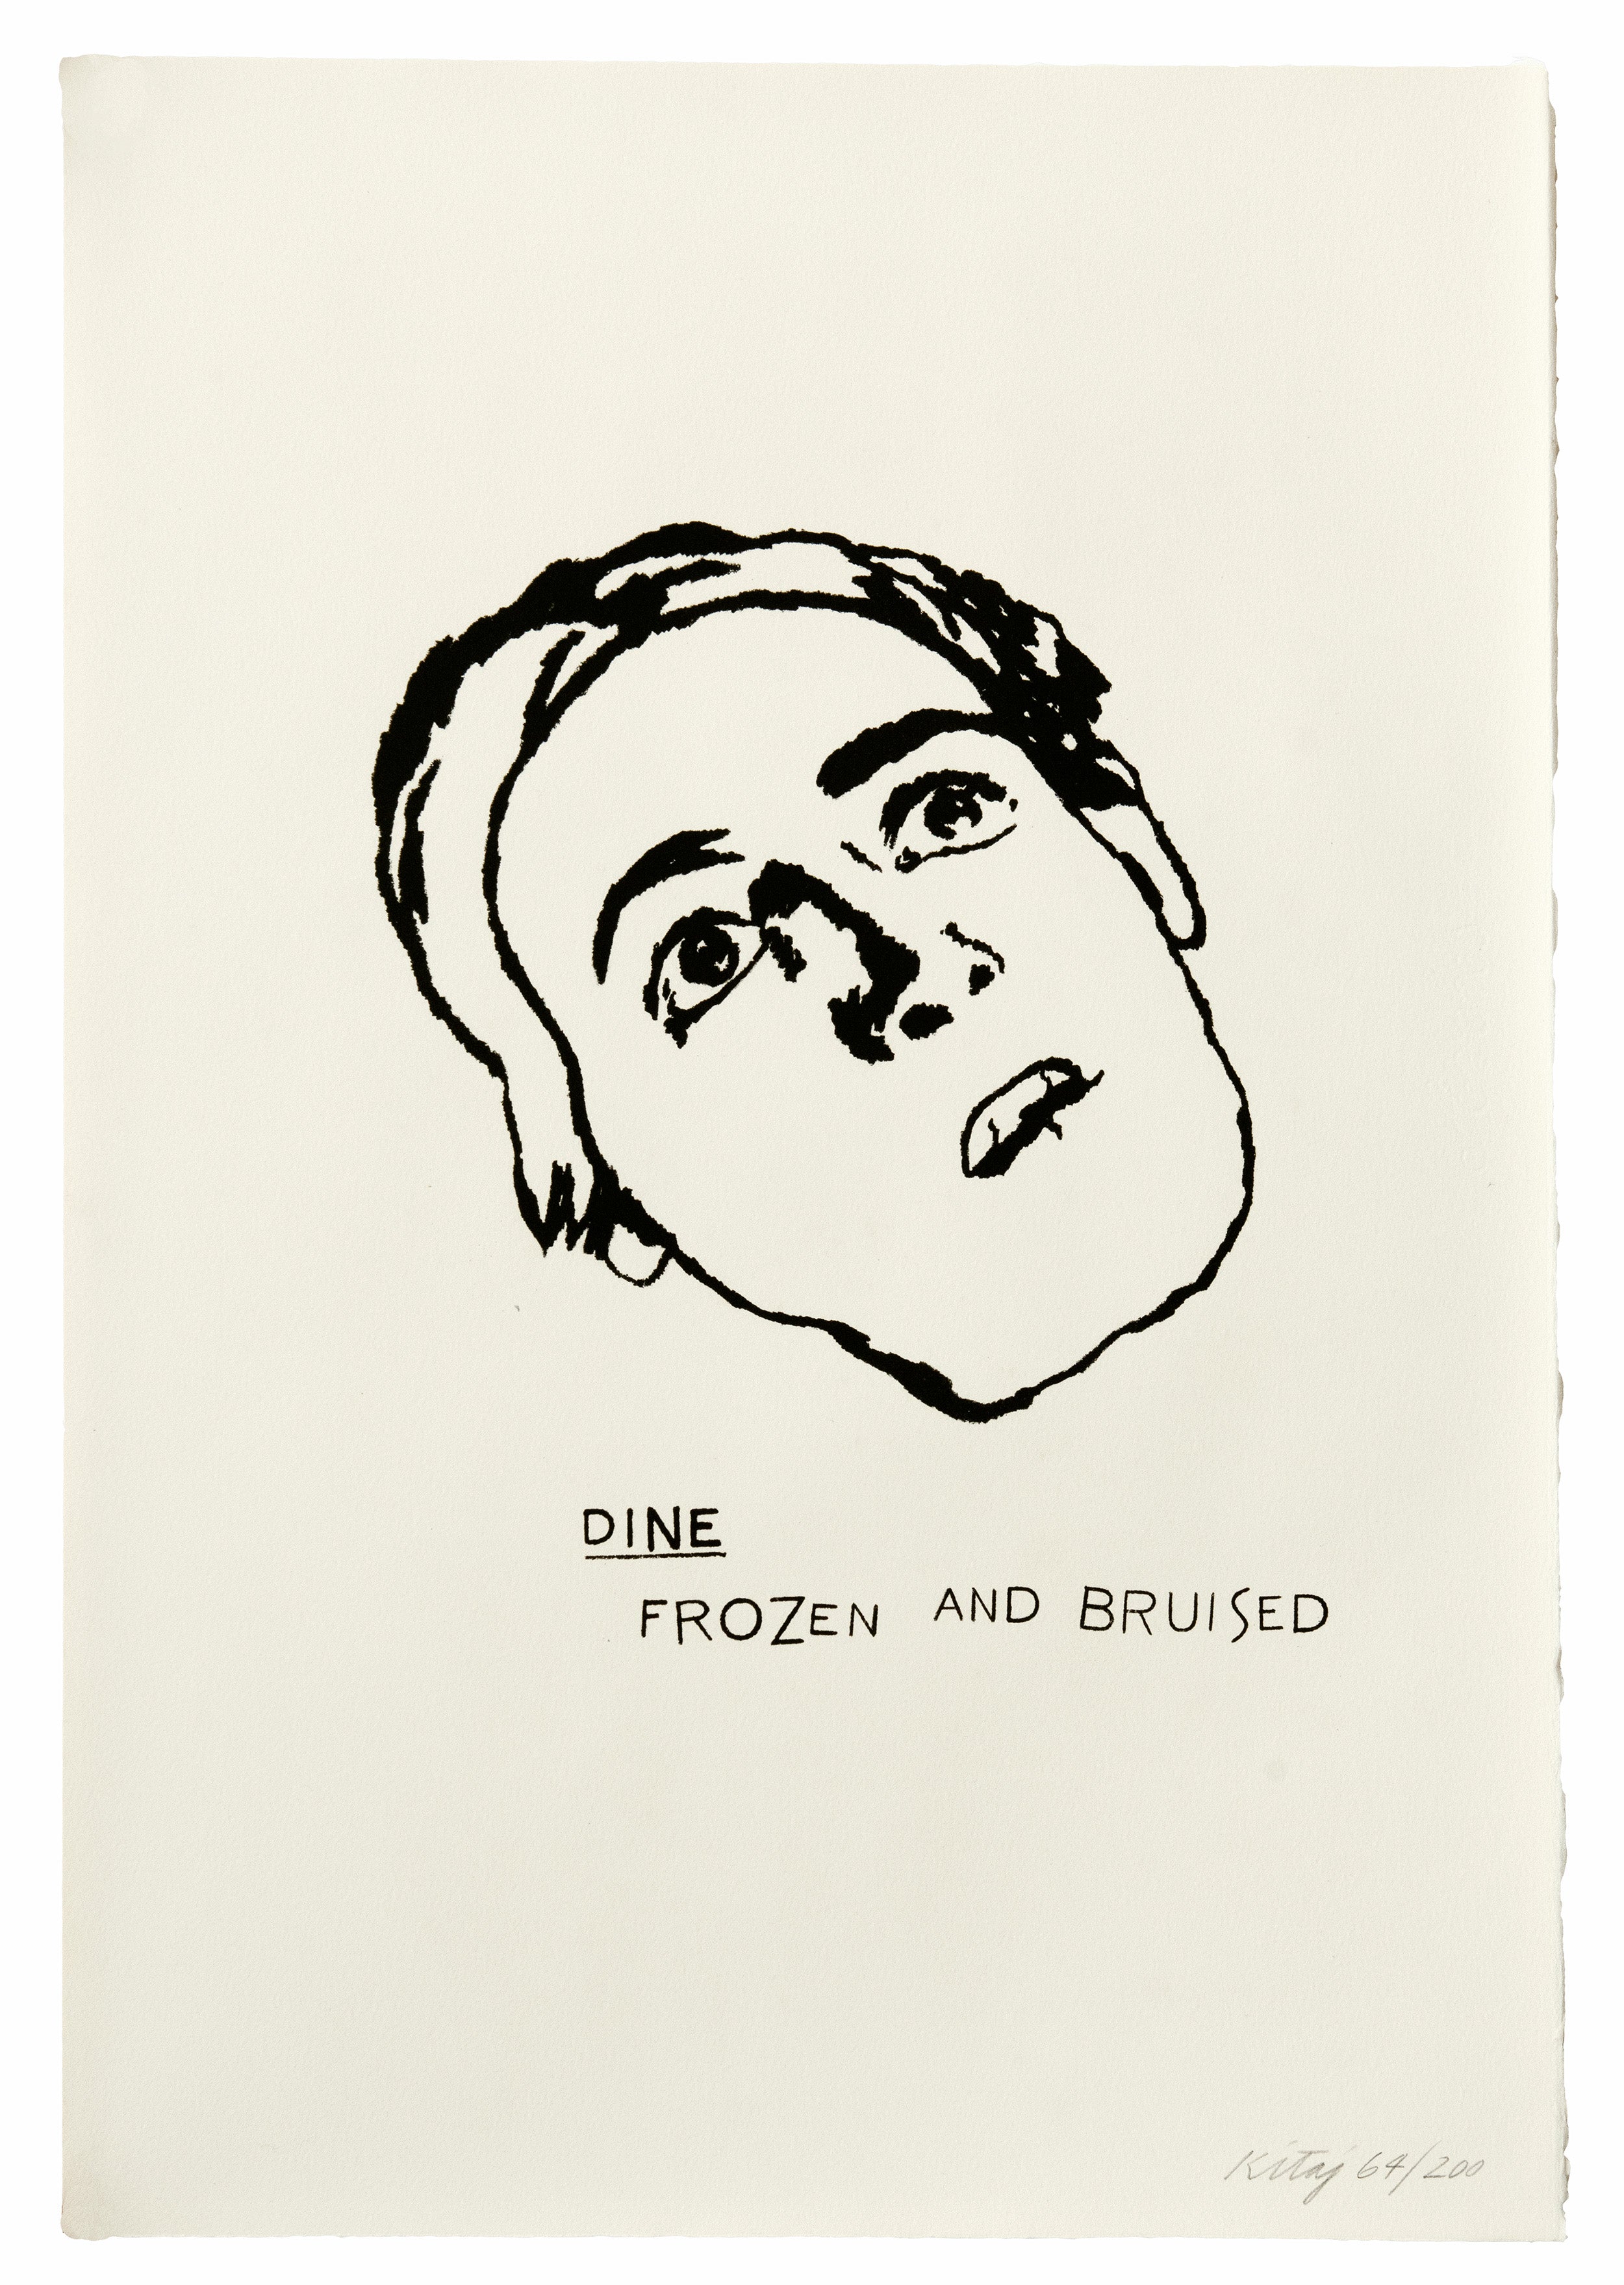 Dine: Frozen and Bruised, lithograph